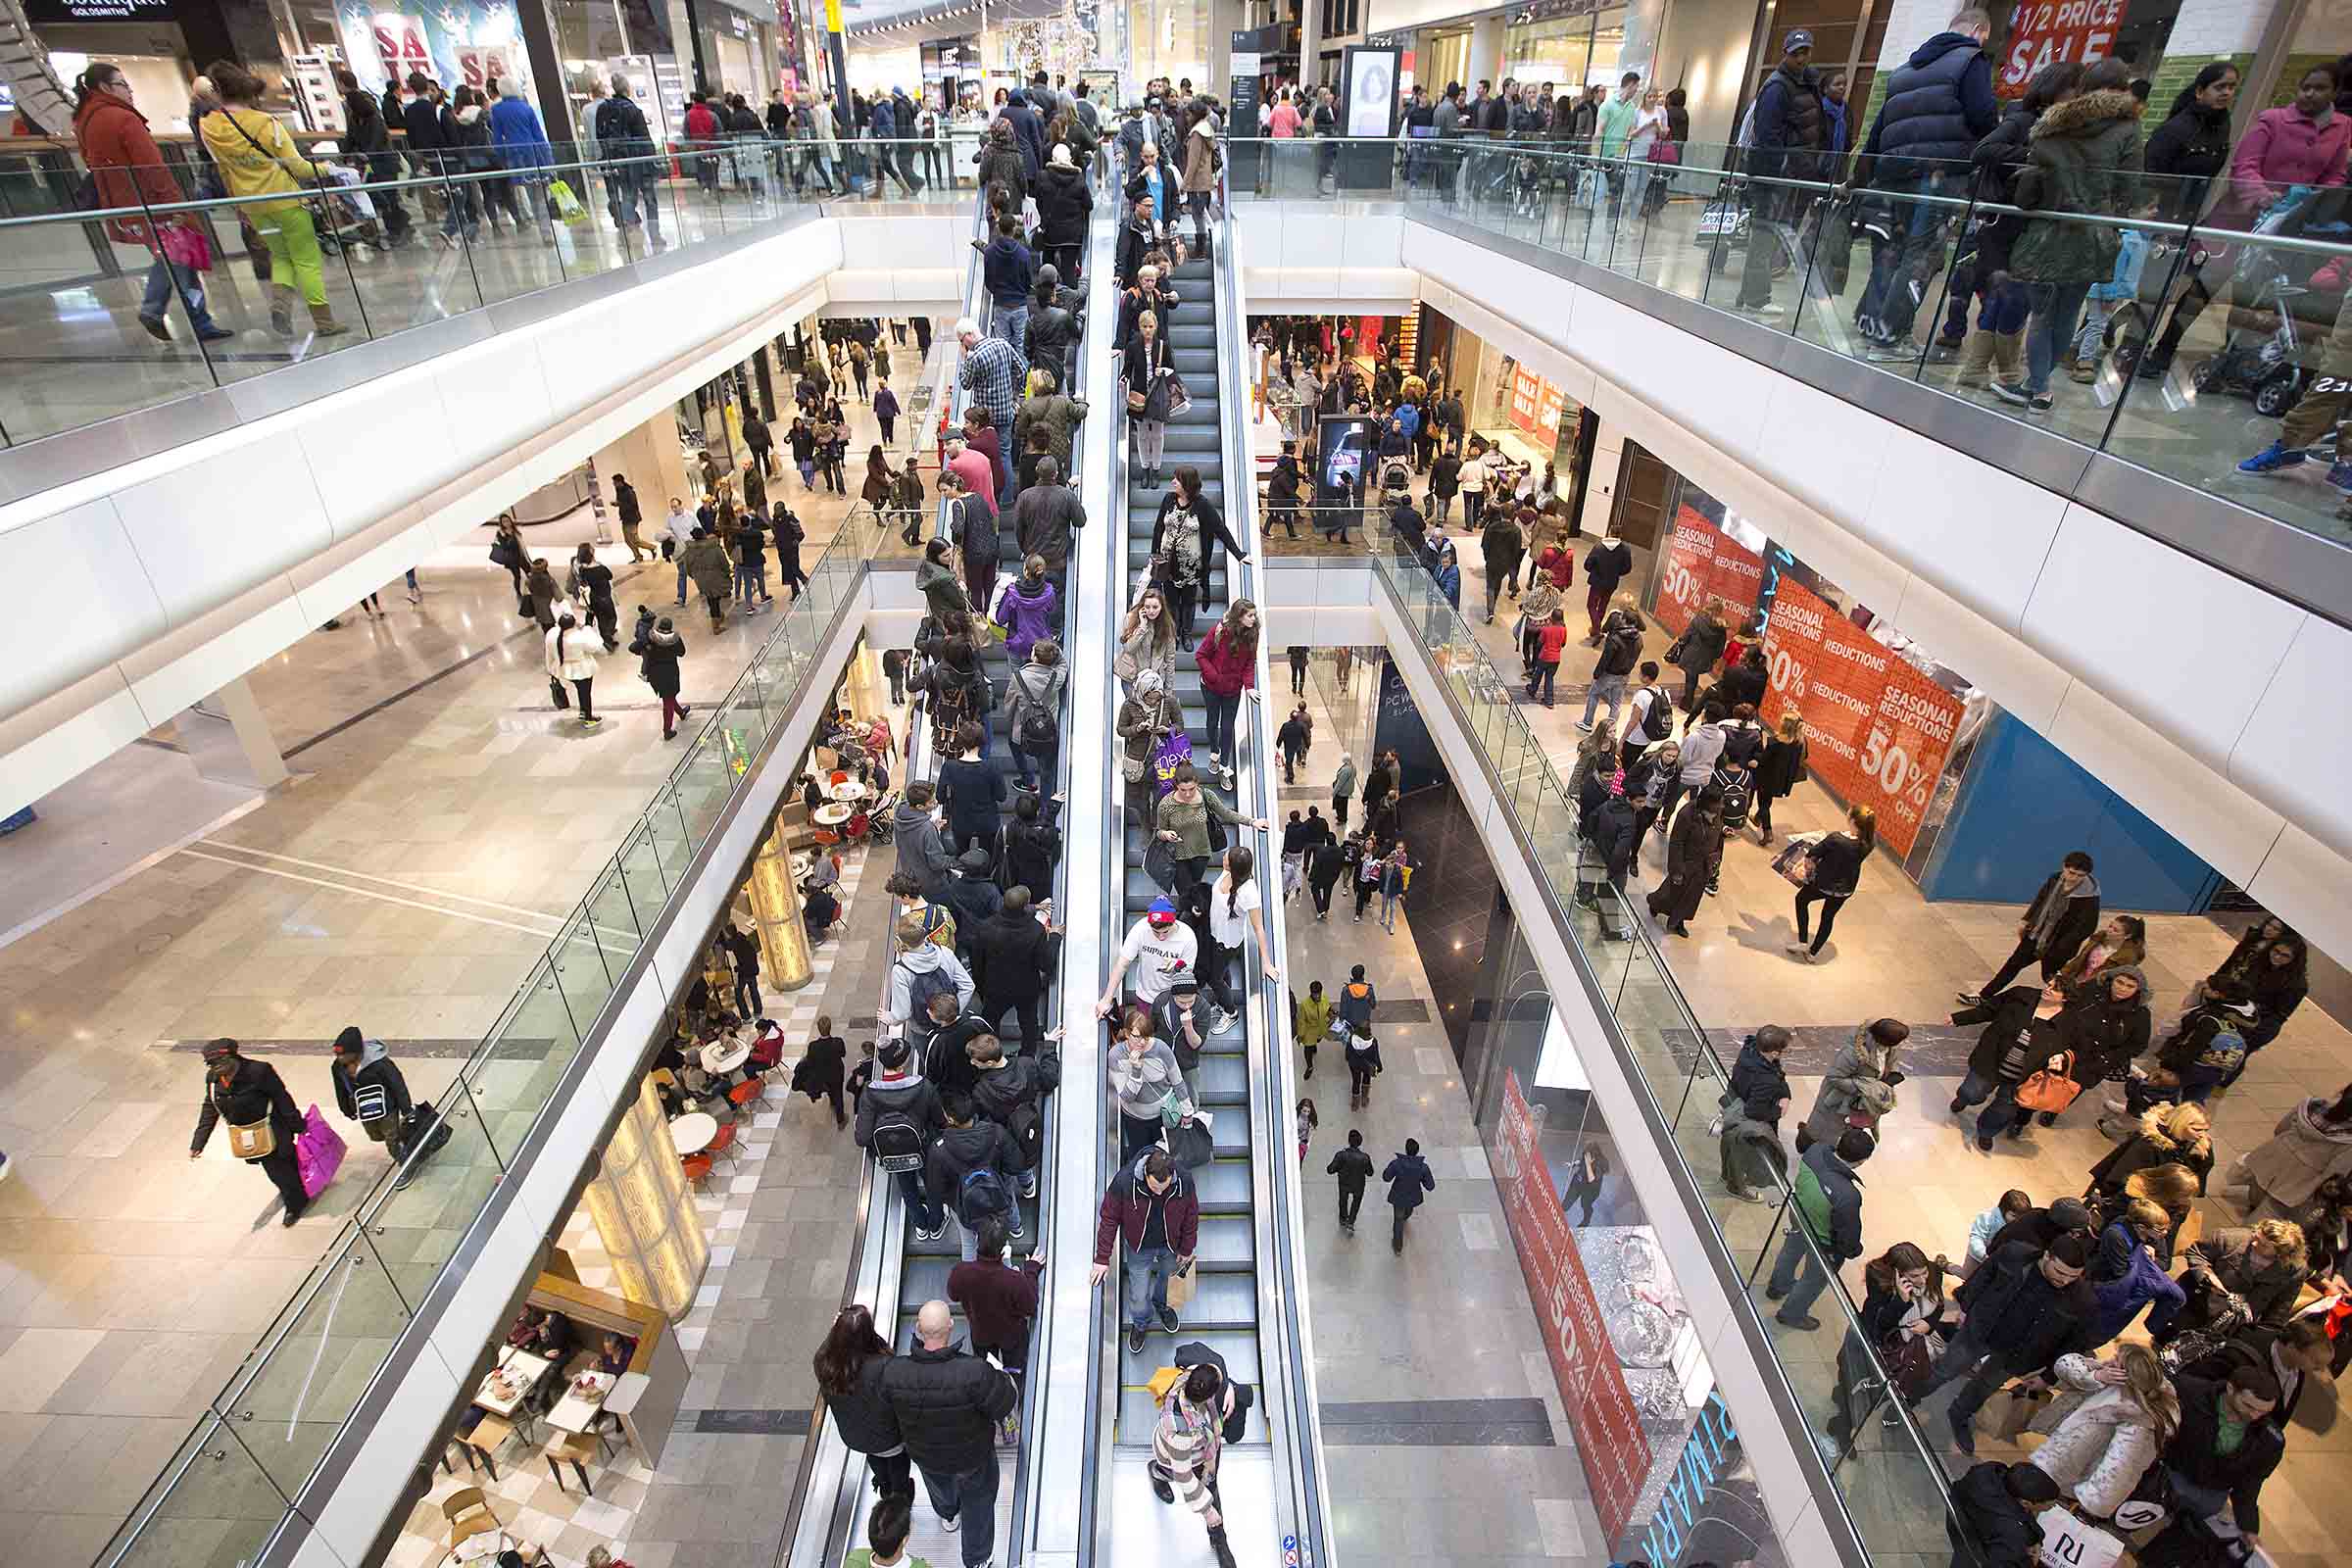 Westfield London Expands Its Retail Offer